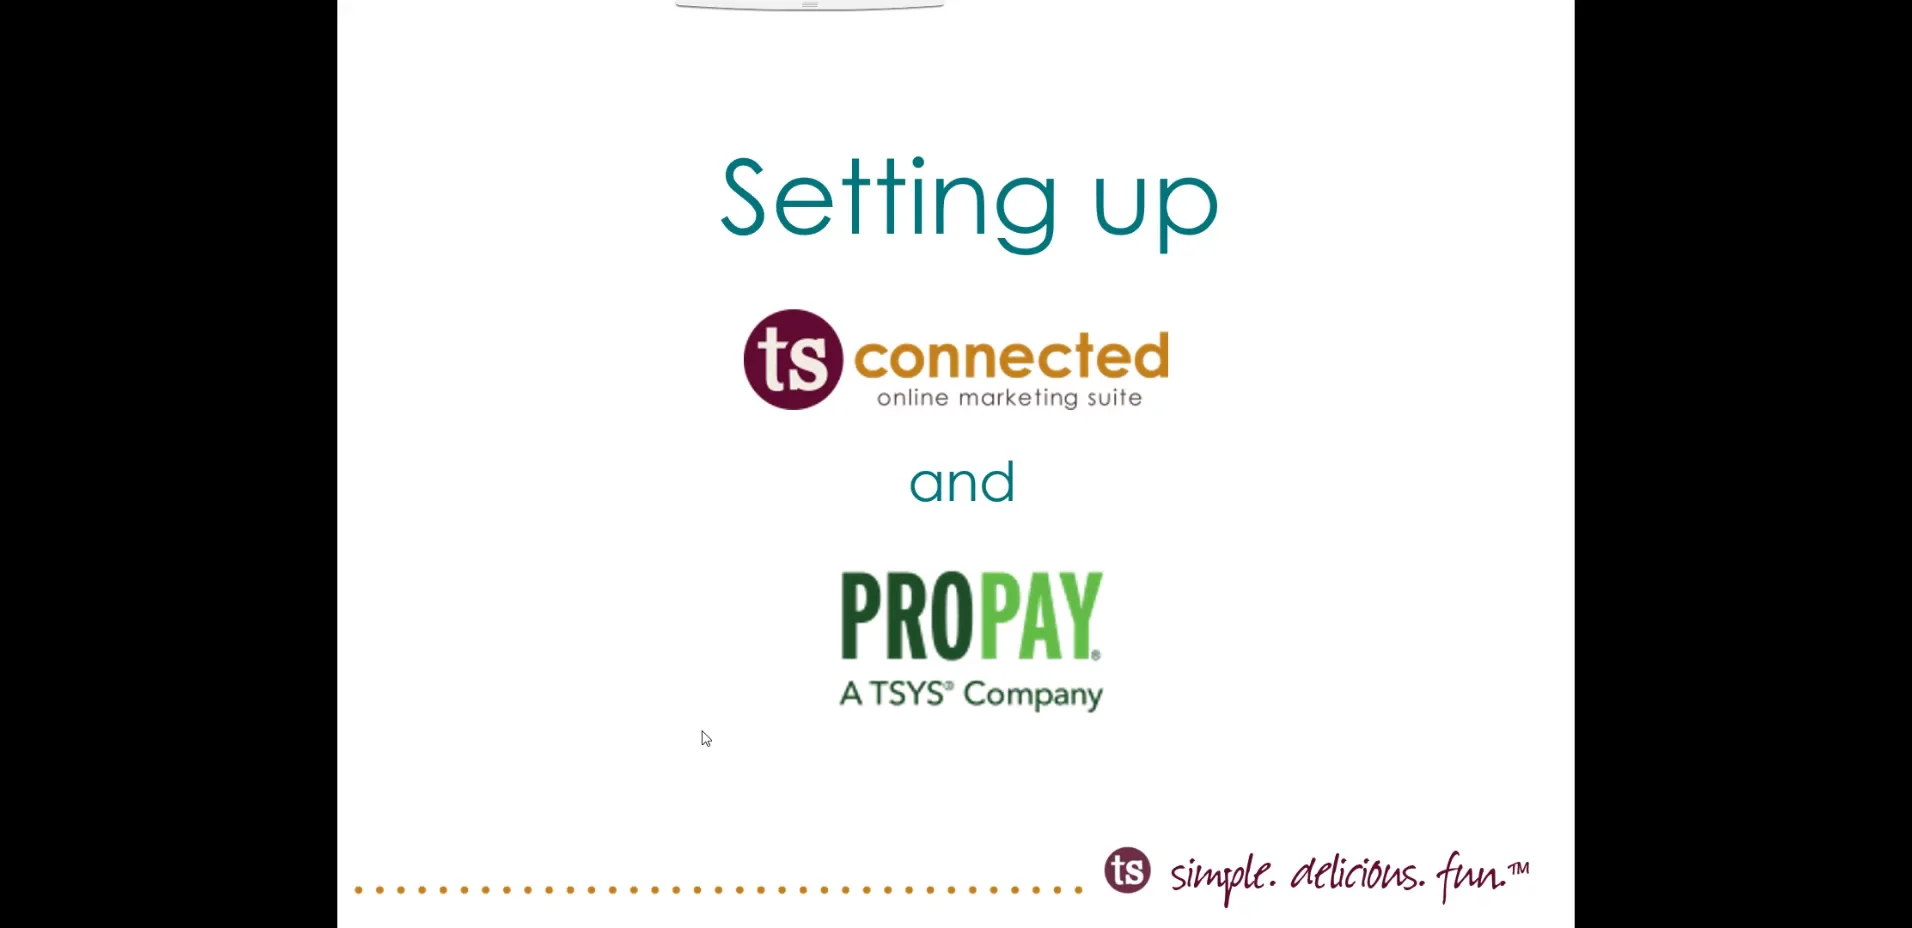 ProPay: How ProPay Works